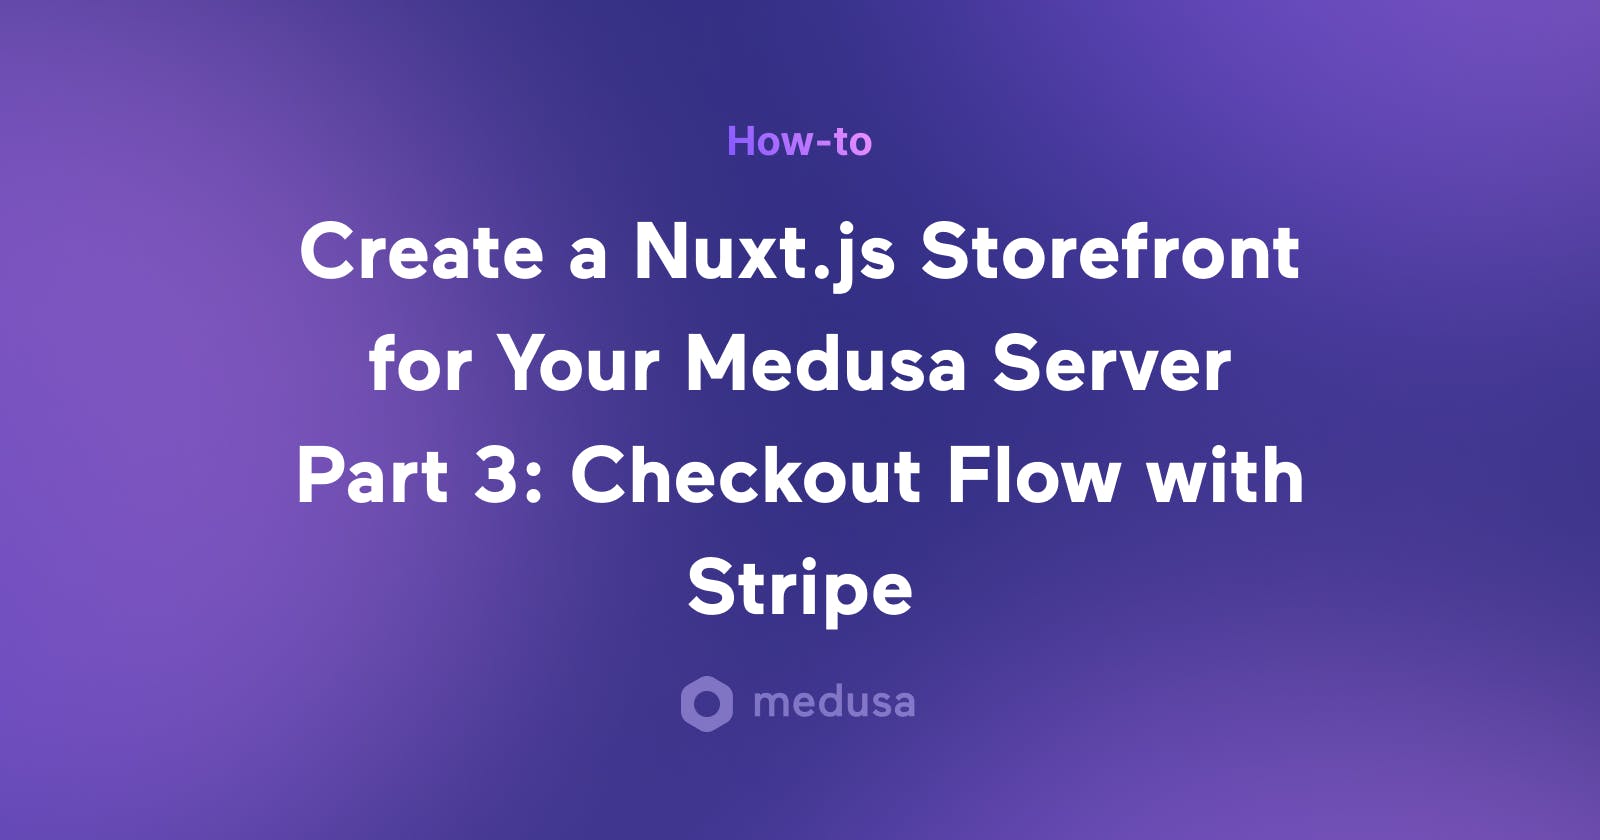 How I Created a Nuxt.js Ecommerce Store from Scratch Using Medusa Part 3: Checkout Flow with Stripe